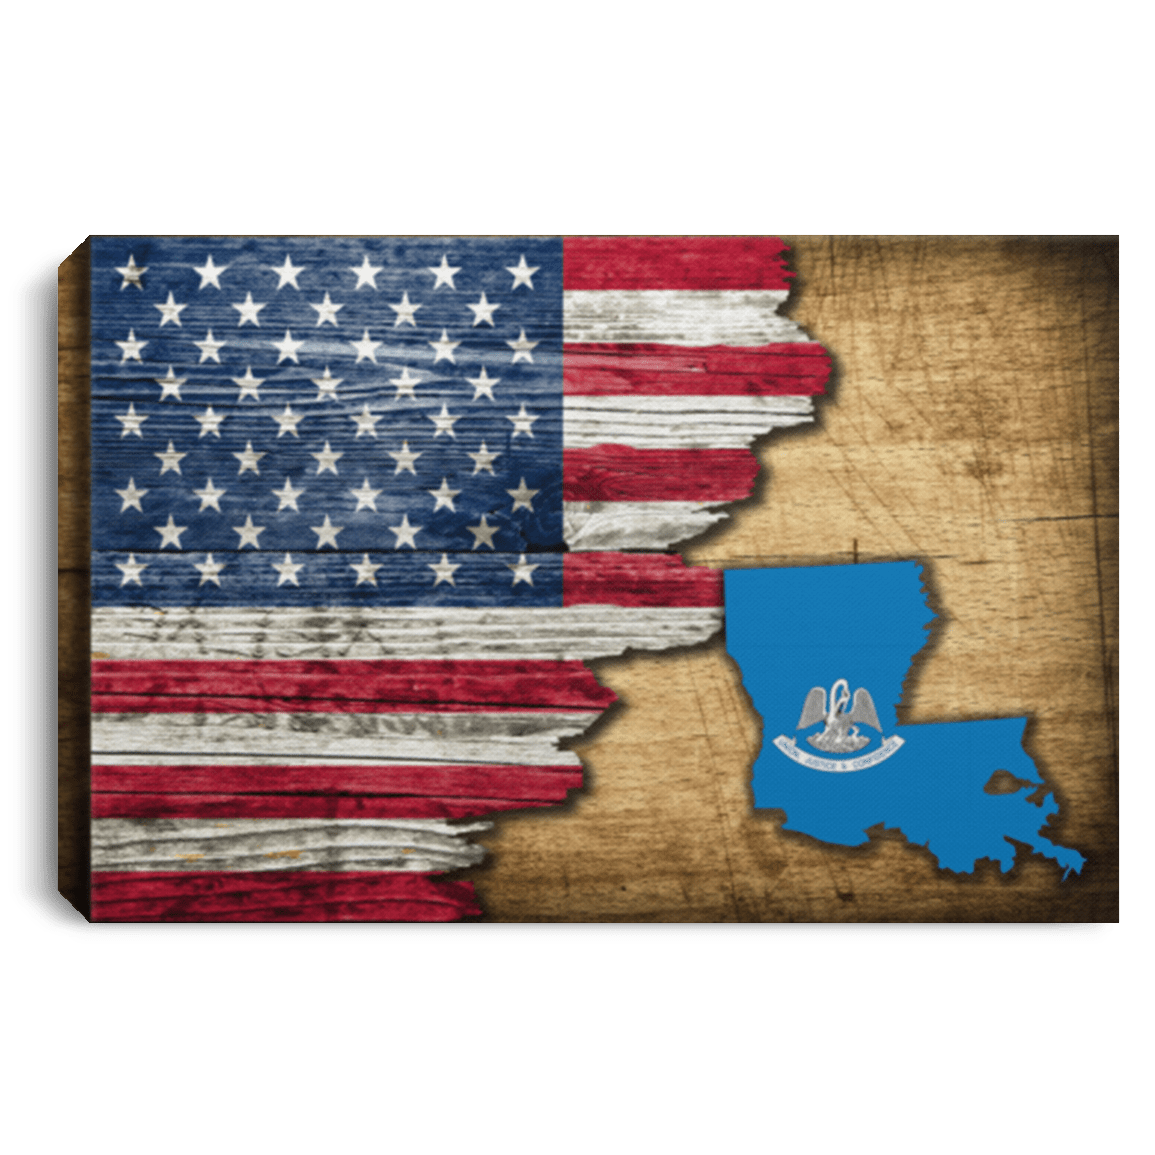 United States/Louisiana Flag Ripped Effect 12X8 Inches Landscape Canvas .75In Frame